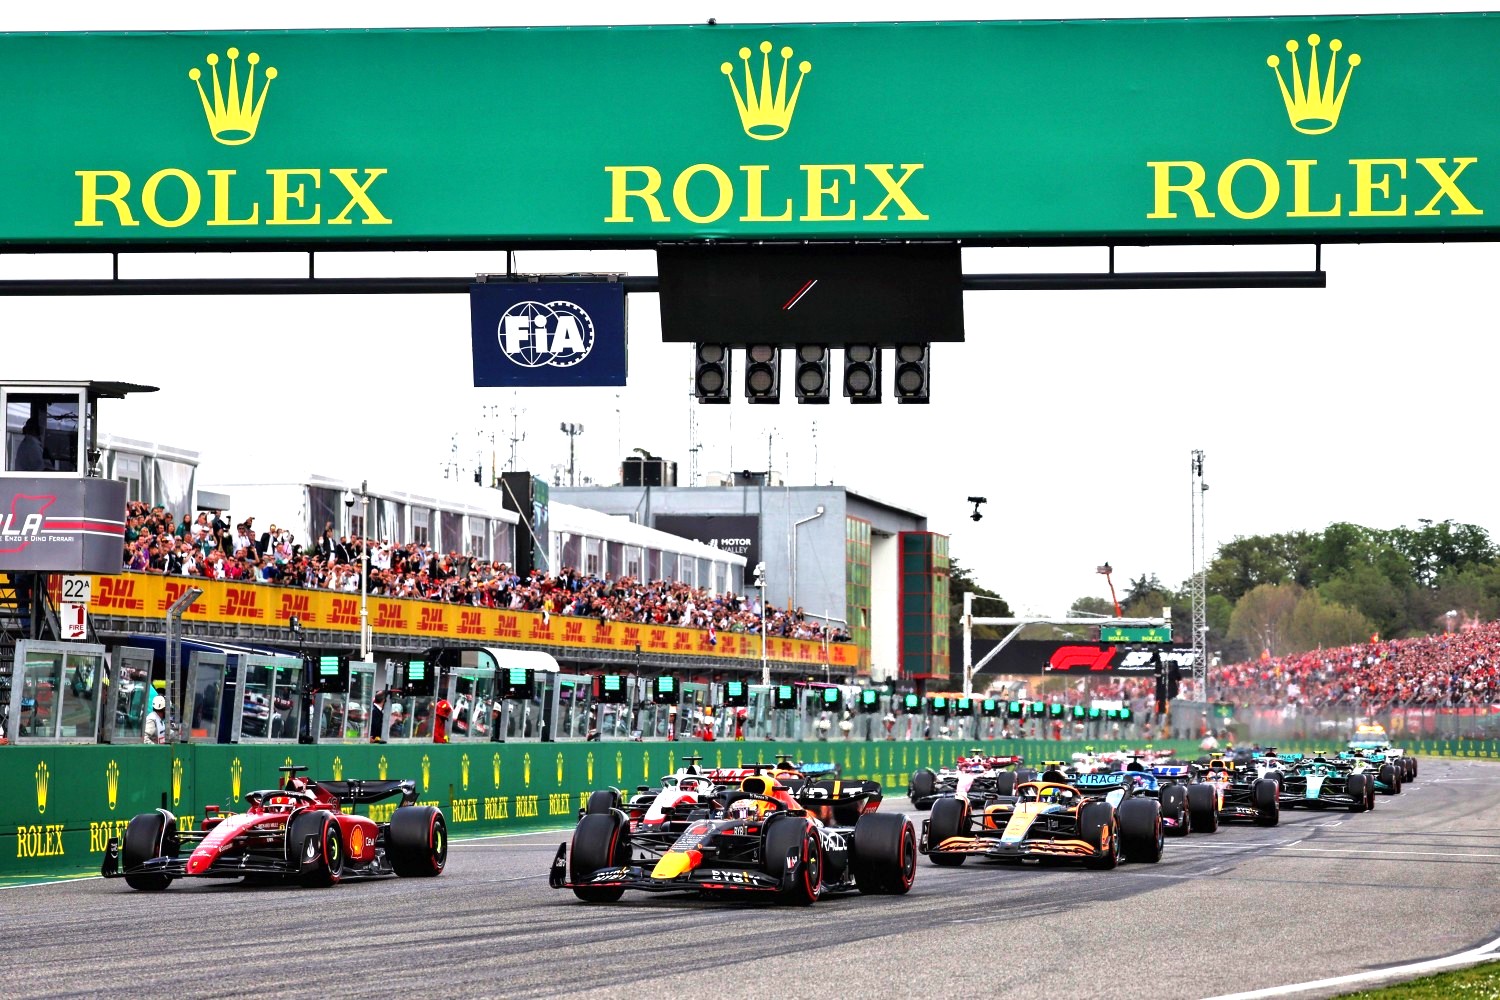 2022 Imola Sprint Race - Leclerc gets the jump on Verstappen from his 2nd place grid spot at the start